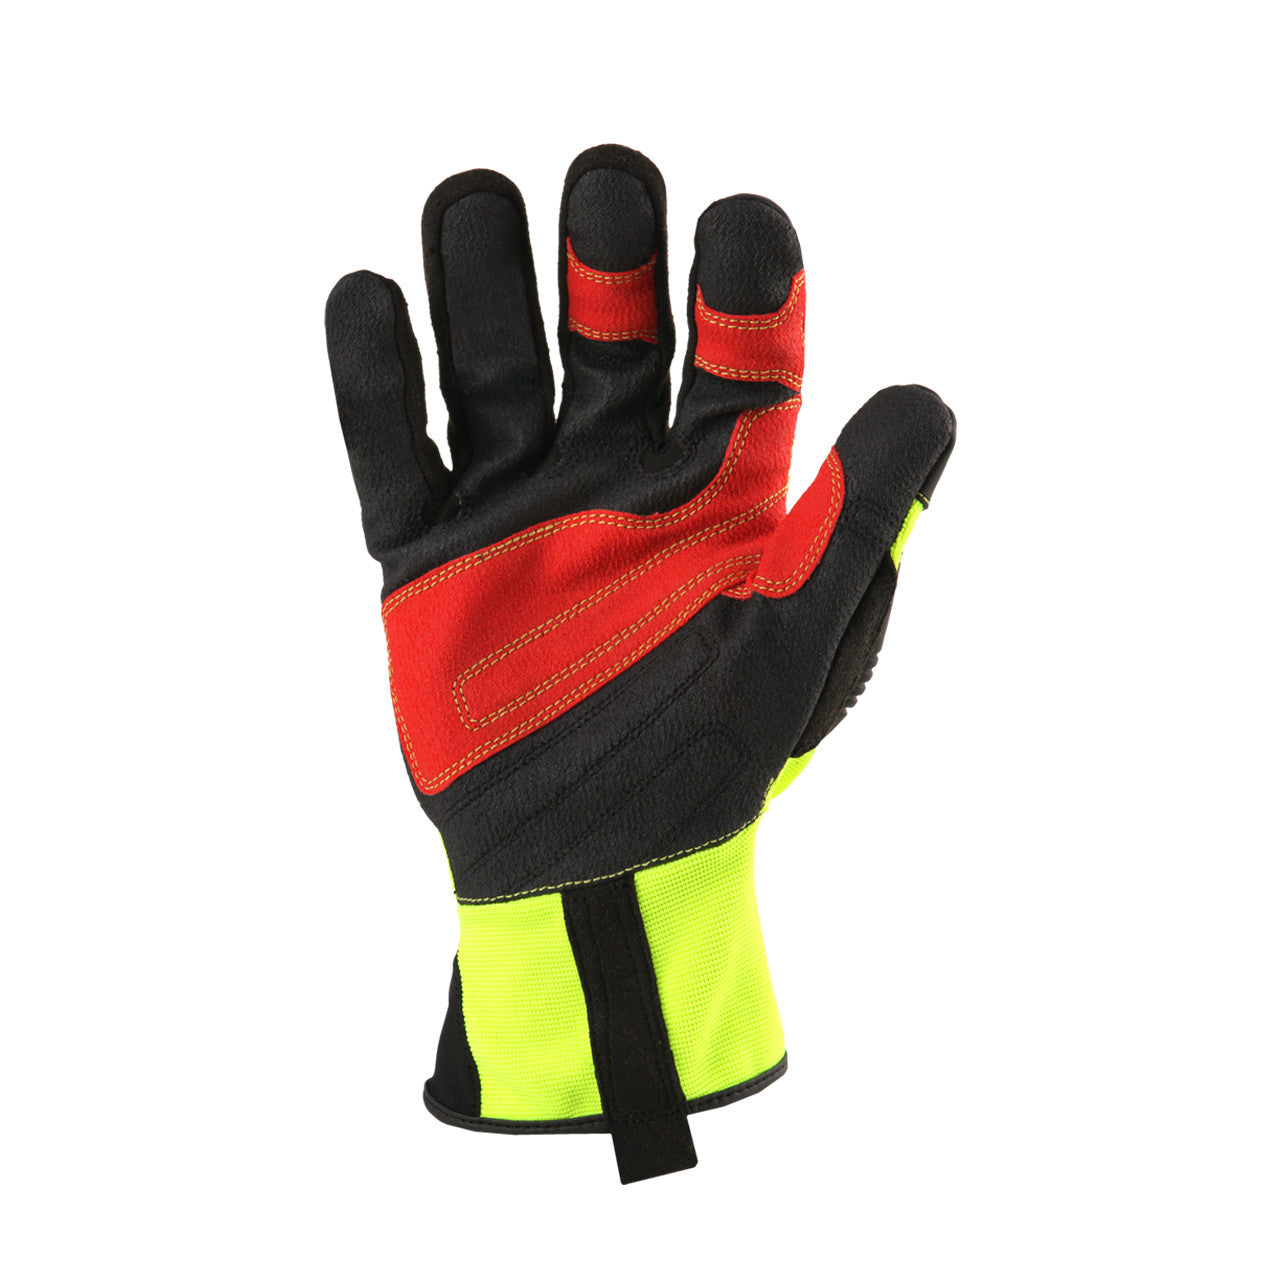 Ironclad KONG® Rigger A2 Glove Yellow-eSafety Supplies, Inc